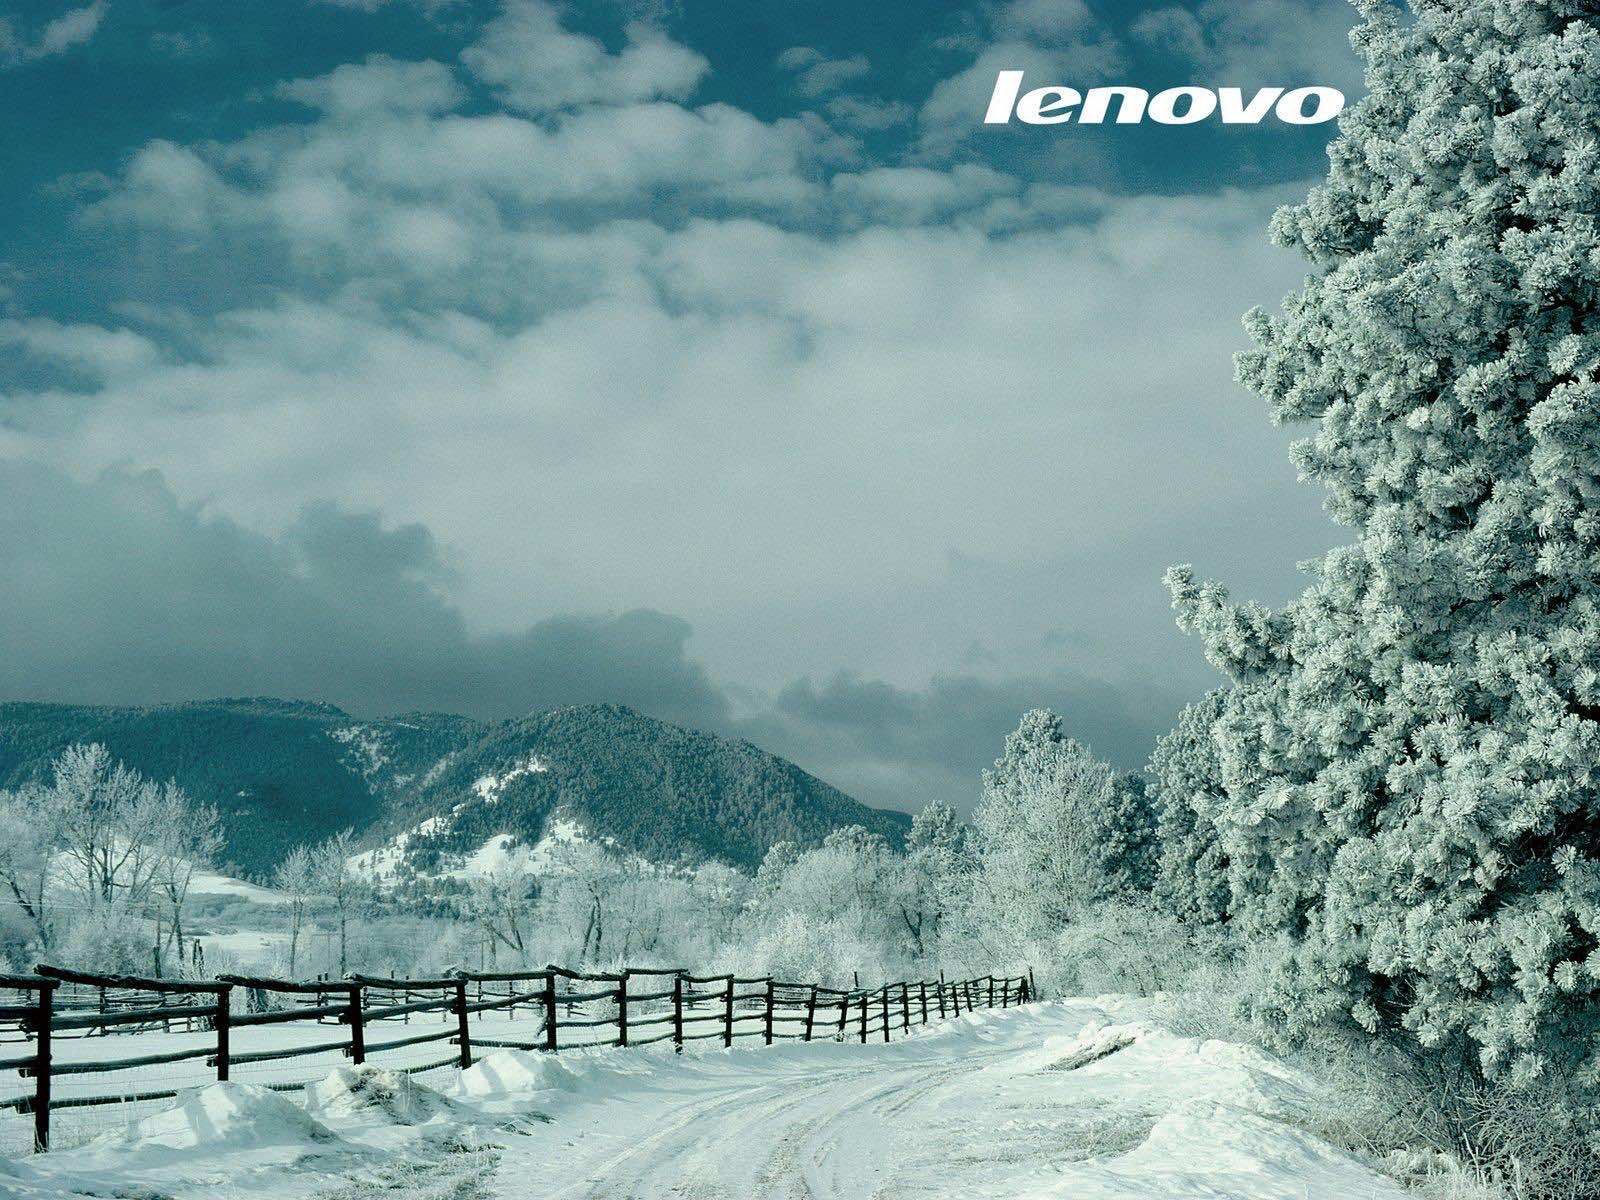 Lenovo Wallpaper Collection in HD for